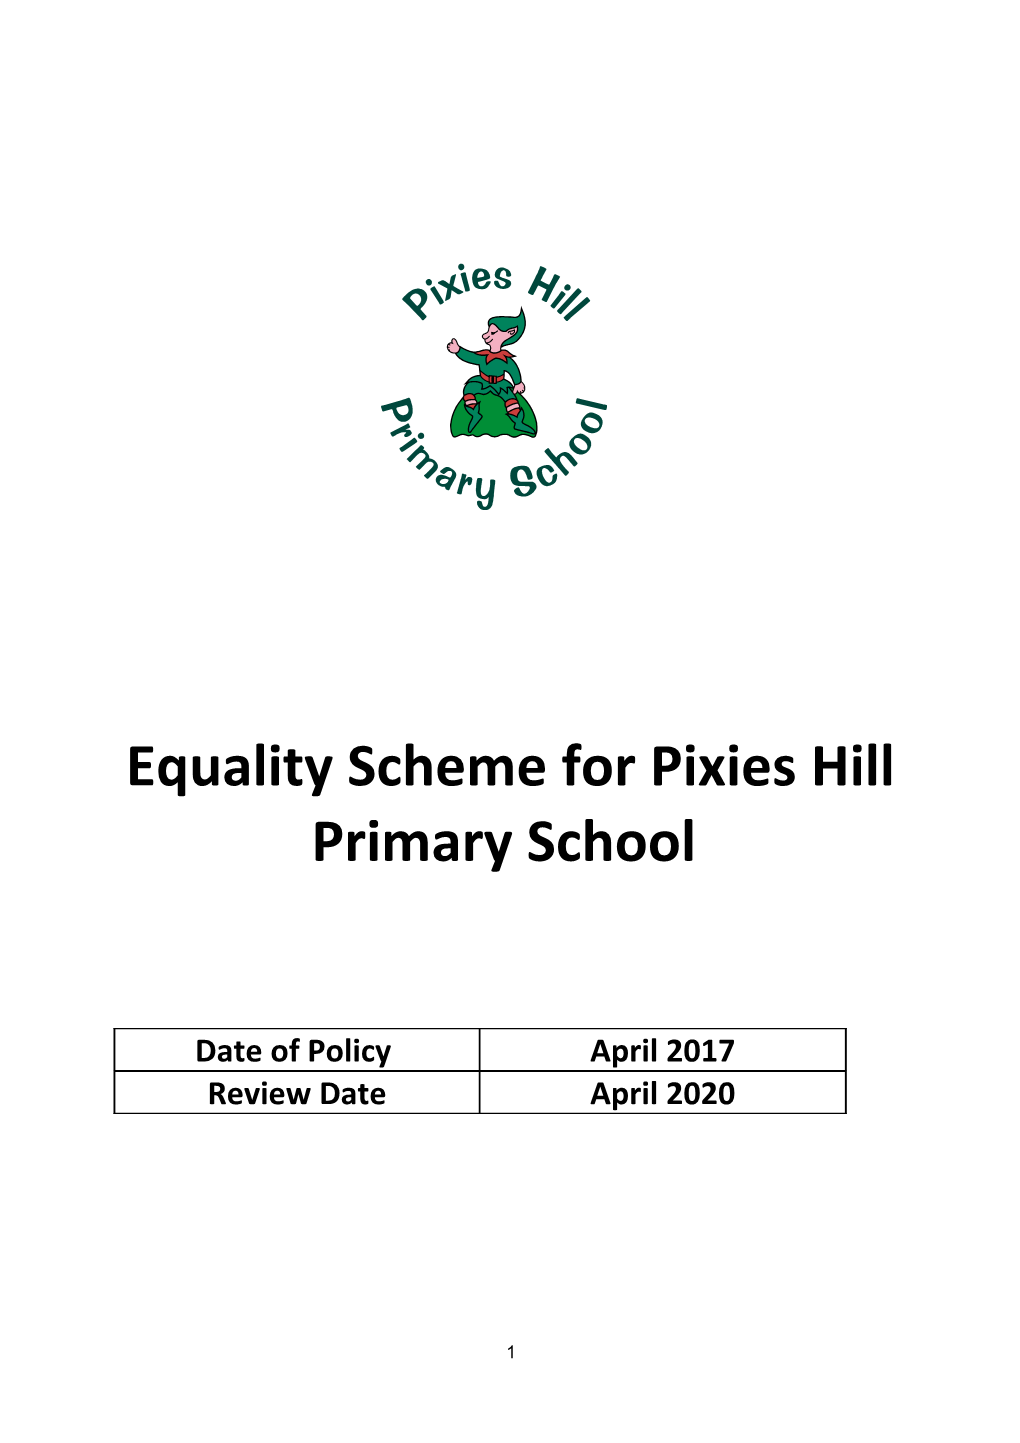 Equality Scheme for Pixies Hill Primary School